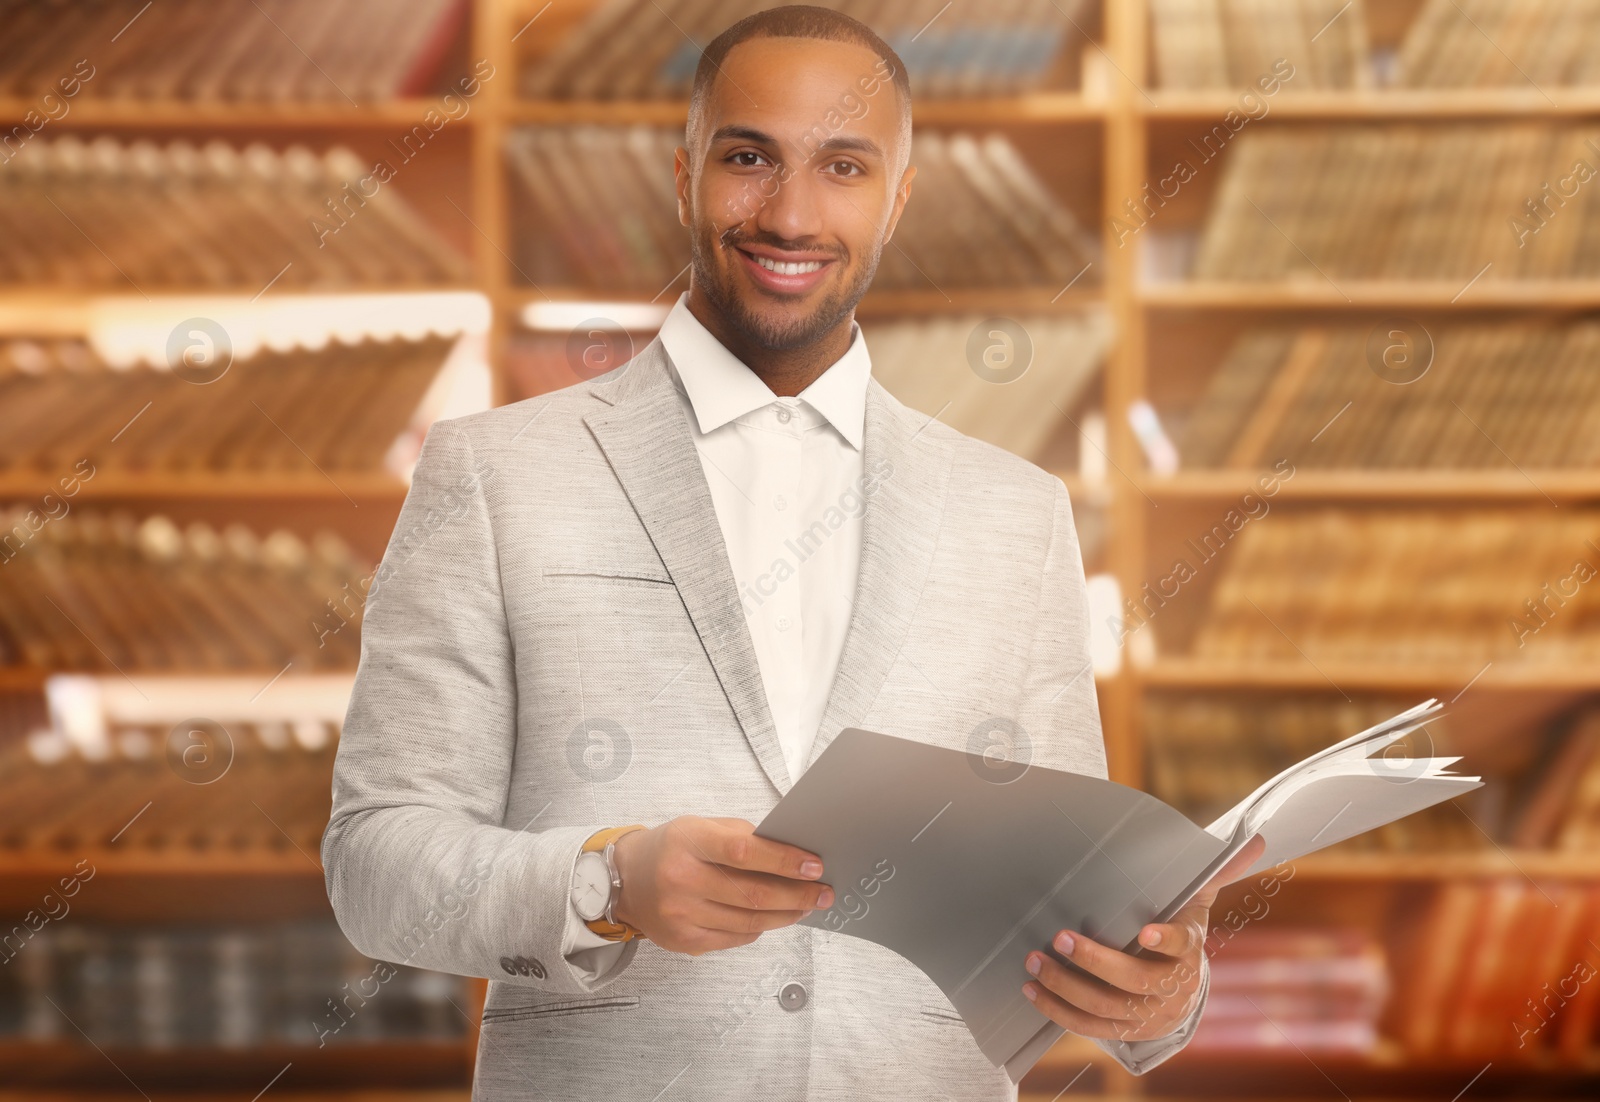 Image of Lawyer, consultant, business owner. Confident man with file folders smiling indoors